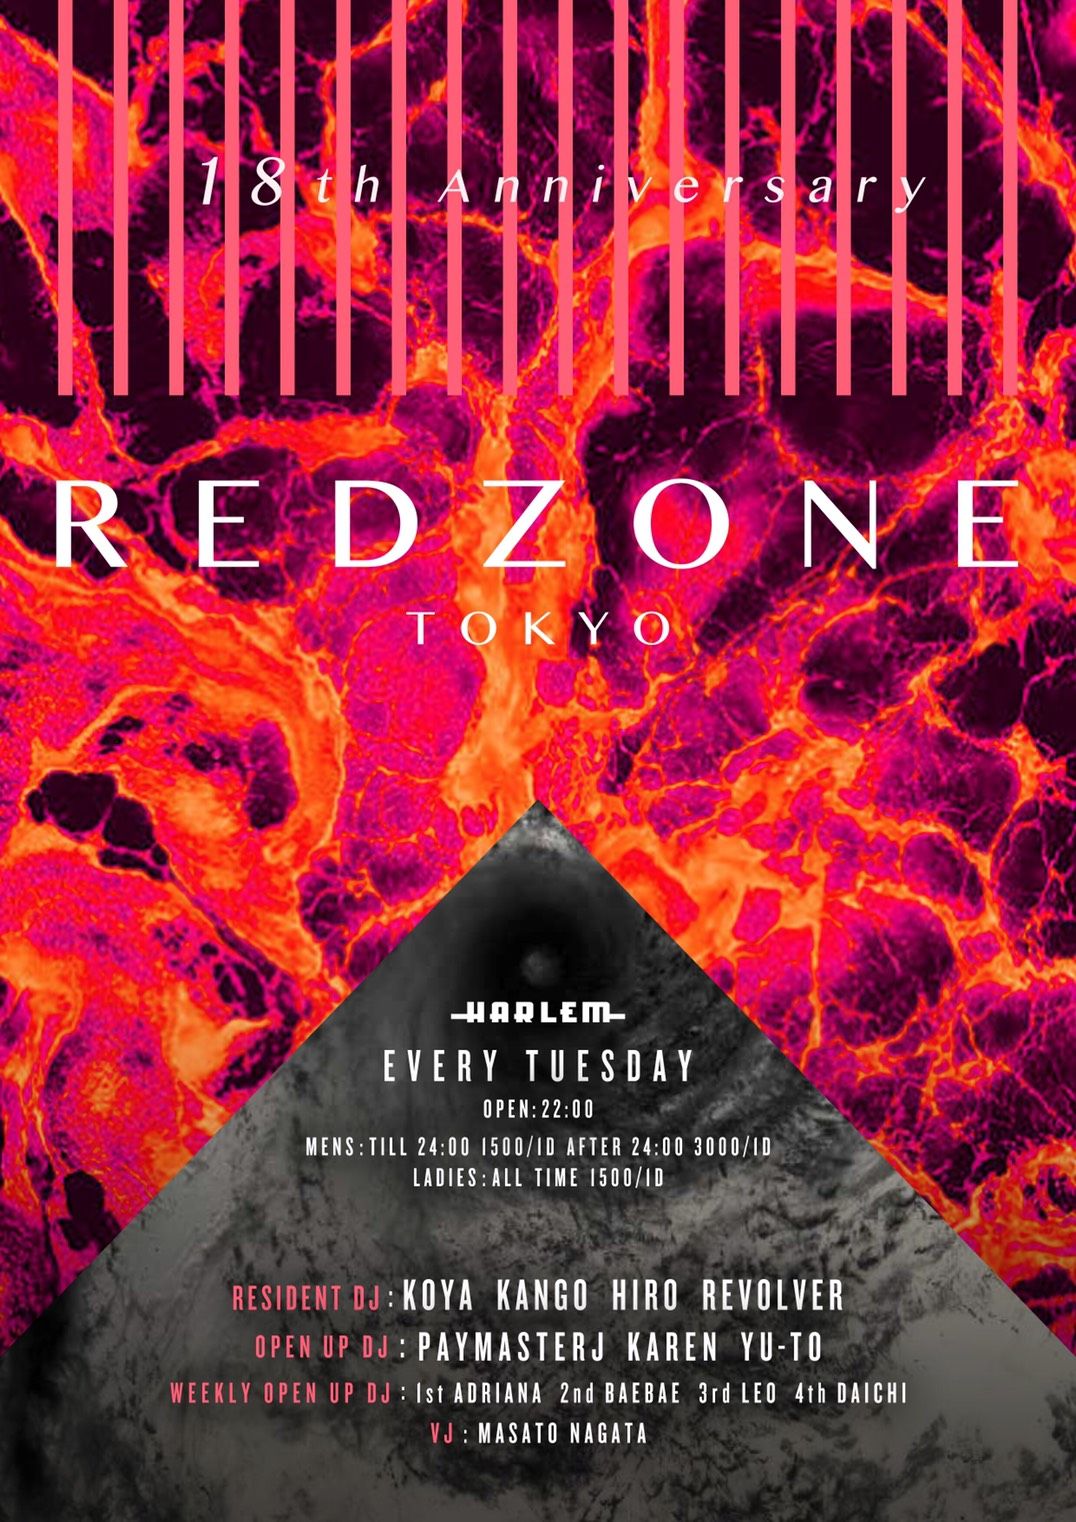 RED ZONE 18th ANNIVERSARY -Hit the Restart button And begin REIWA-